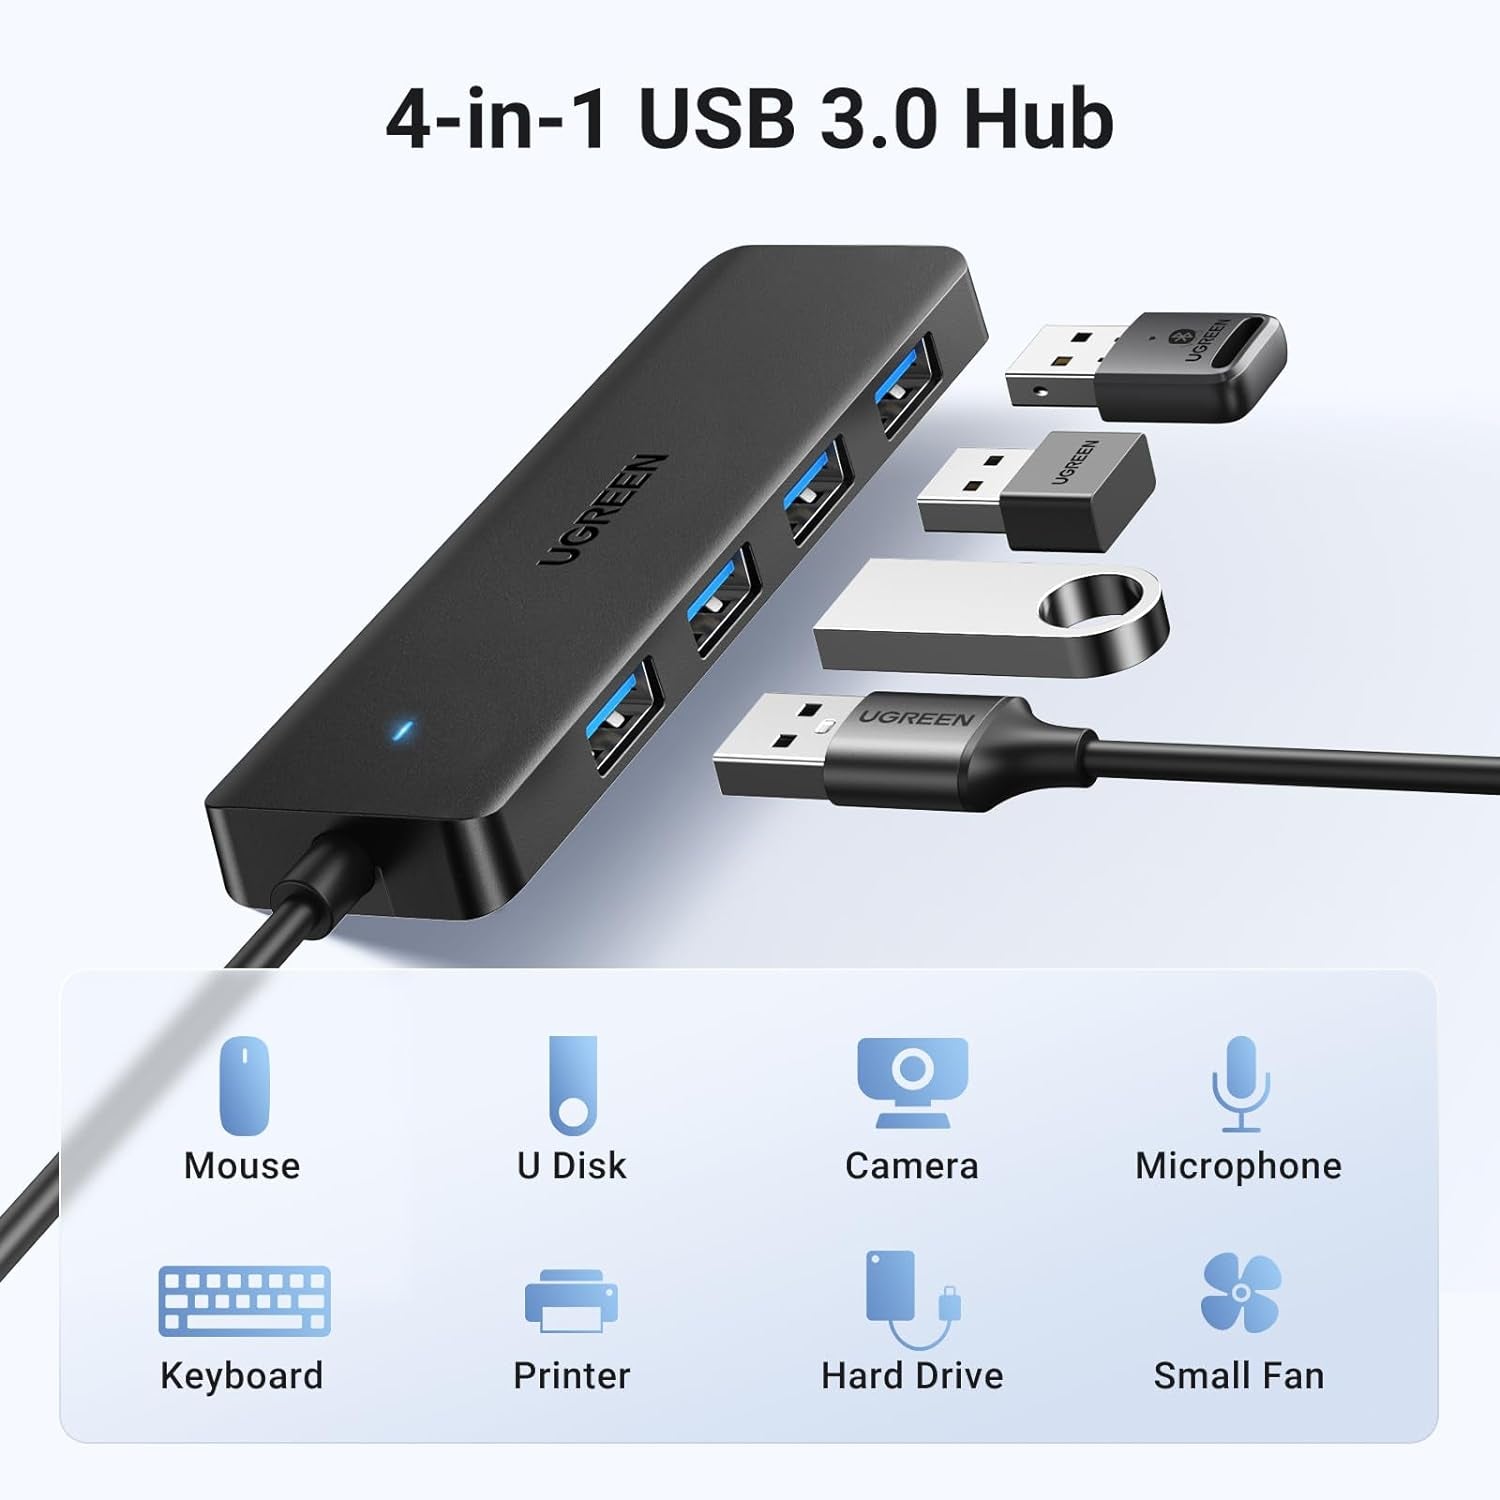 USB Hub 3.0, USB Splitter 4 Port Ultra Slim with 5Gbps Data Transfer, USB Extender for Mouse, Keyboard, Flash Drive, U Disk, Printer, Compatible with Laptop, Desktop PC, Xbox, PS5, and More